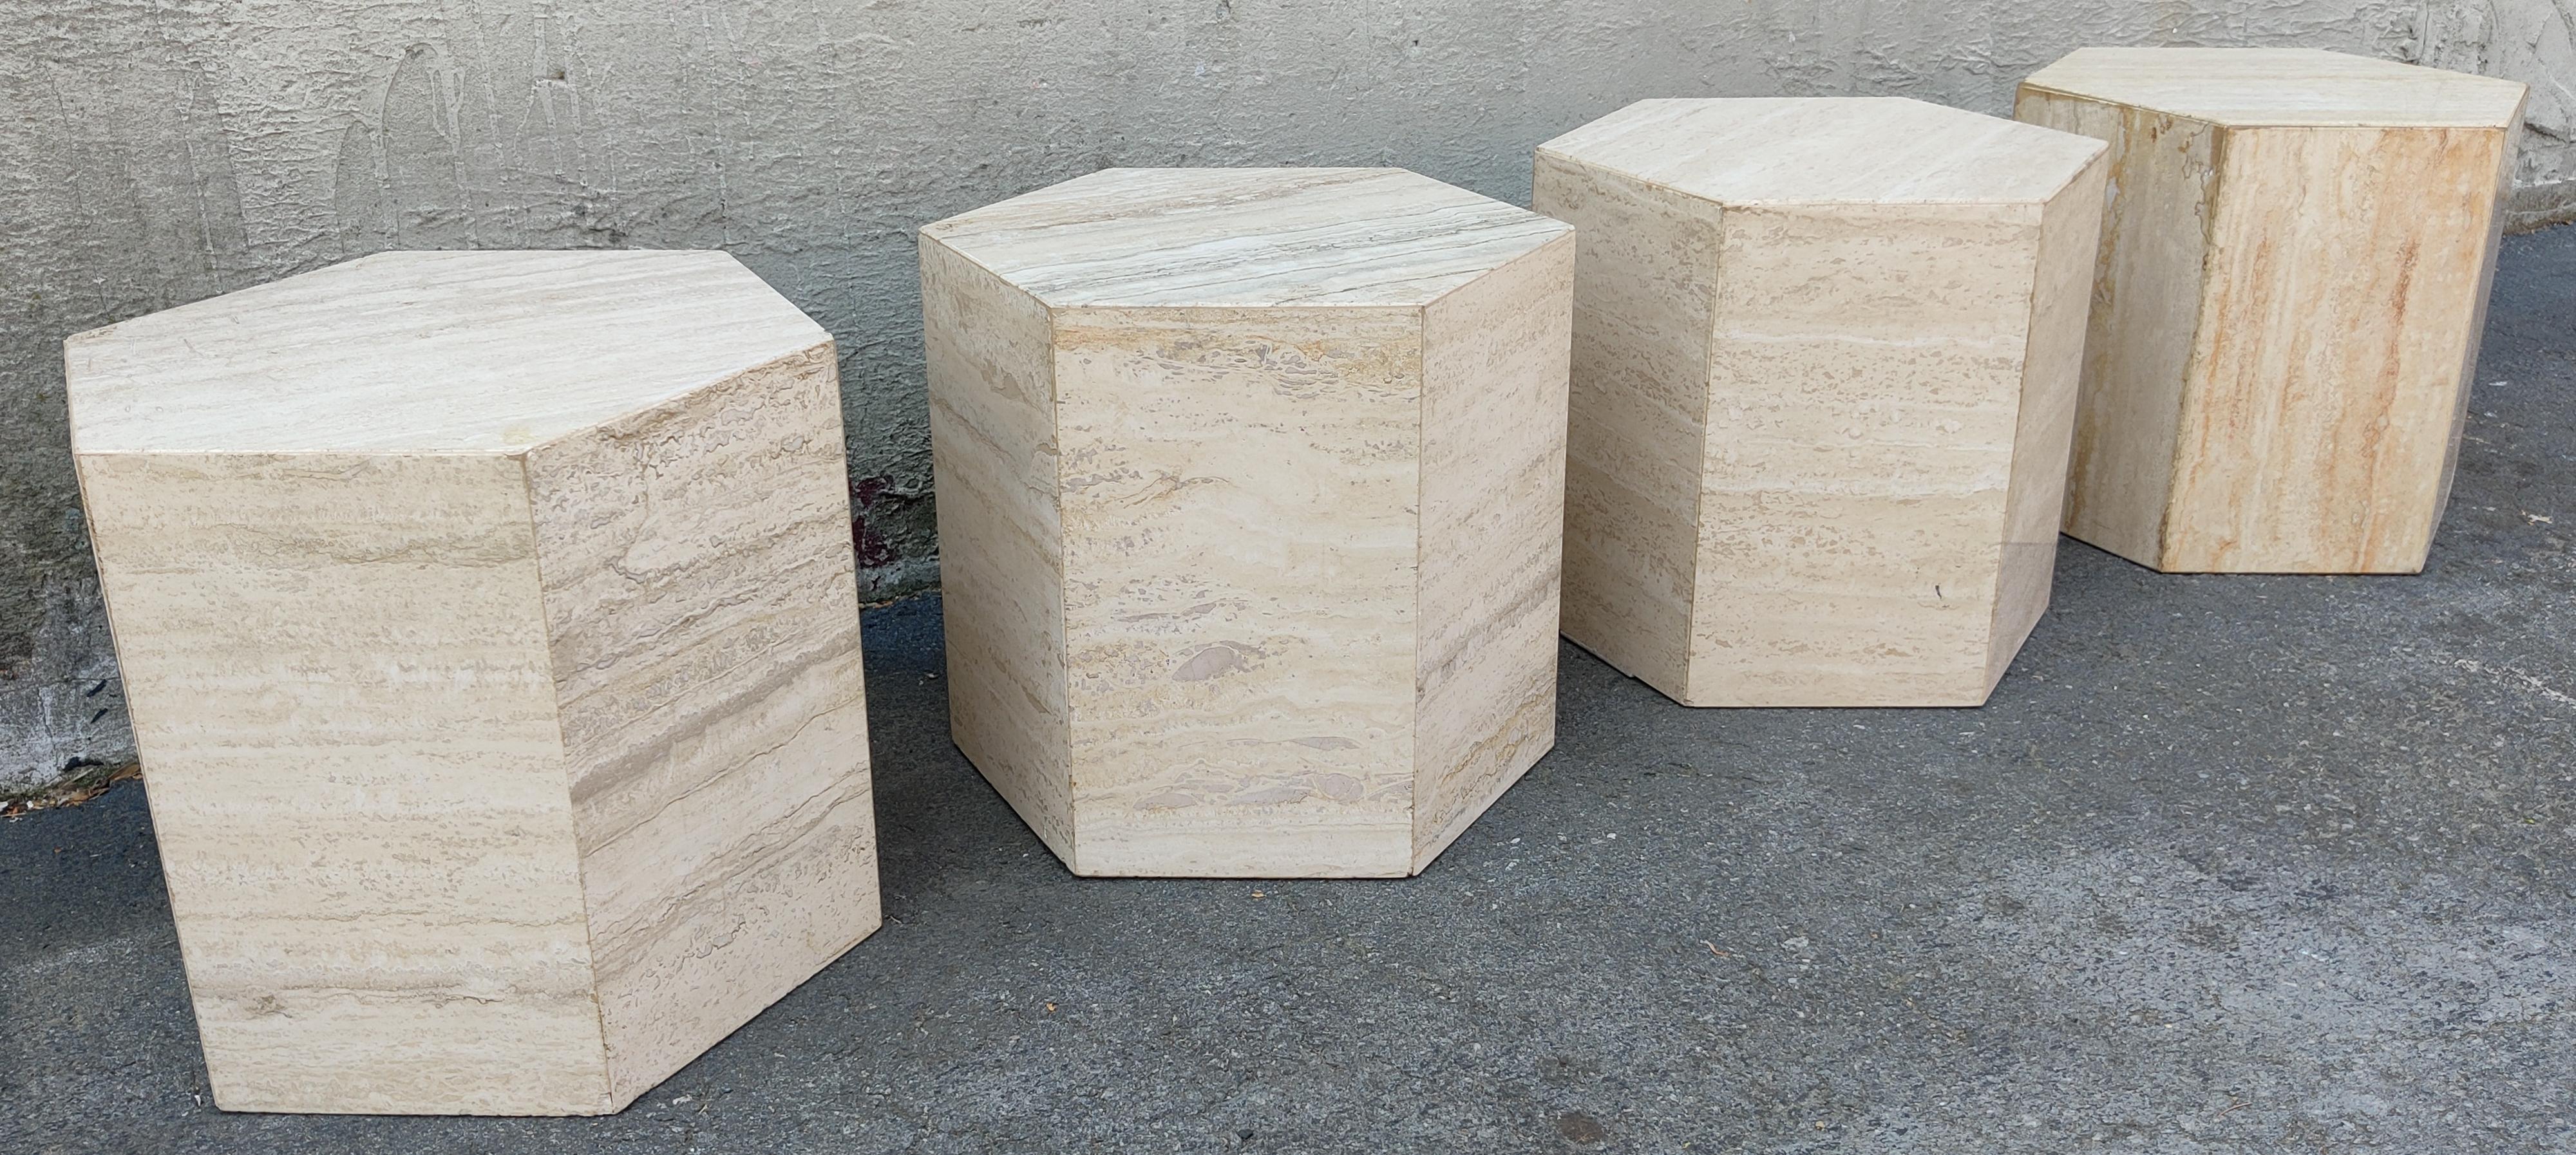 Set of Four Post-Modern Italian Travertine Marble Hexagonal Side Tables, 1970s In Good Condition For Sale In Philadelphia, PA